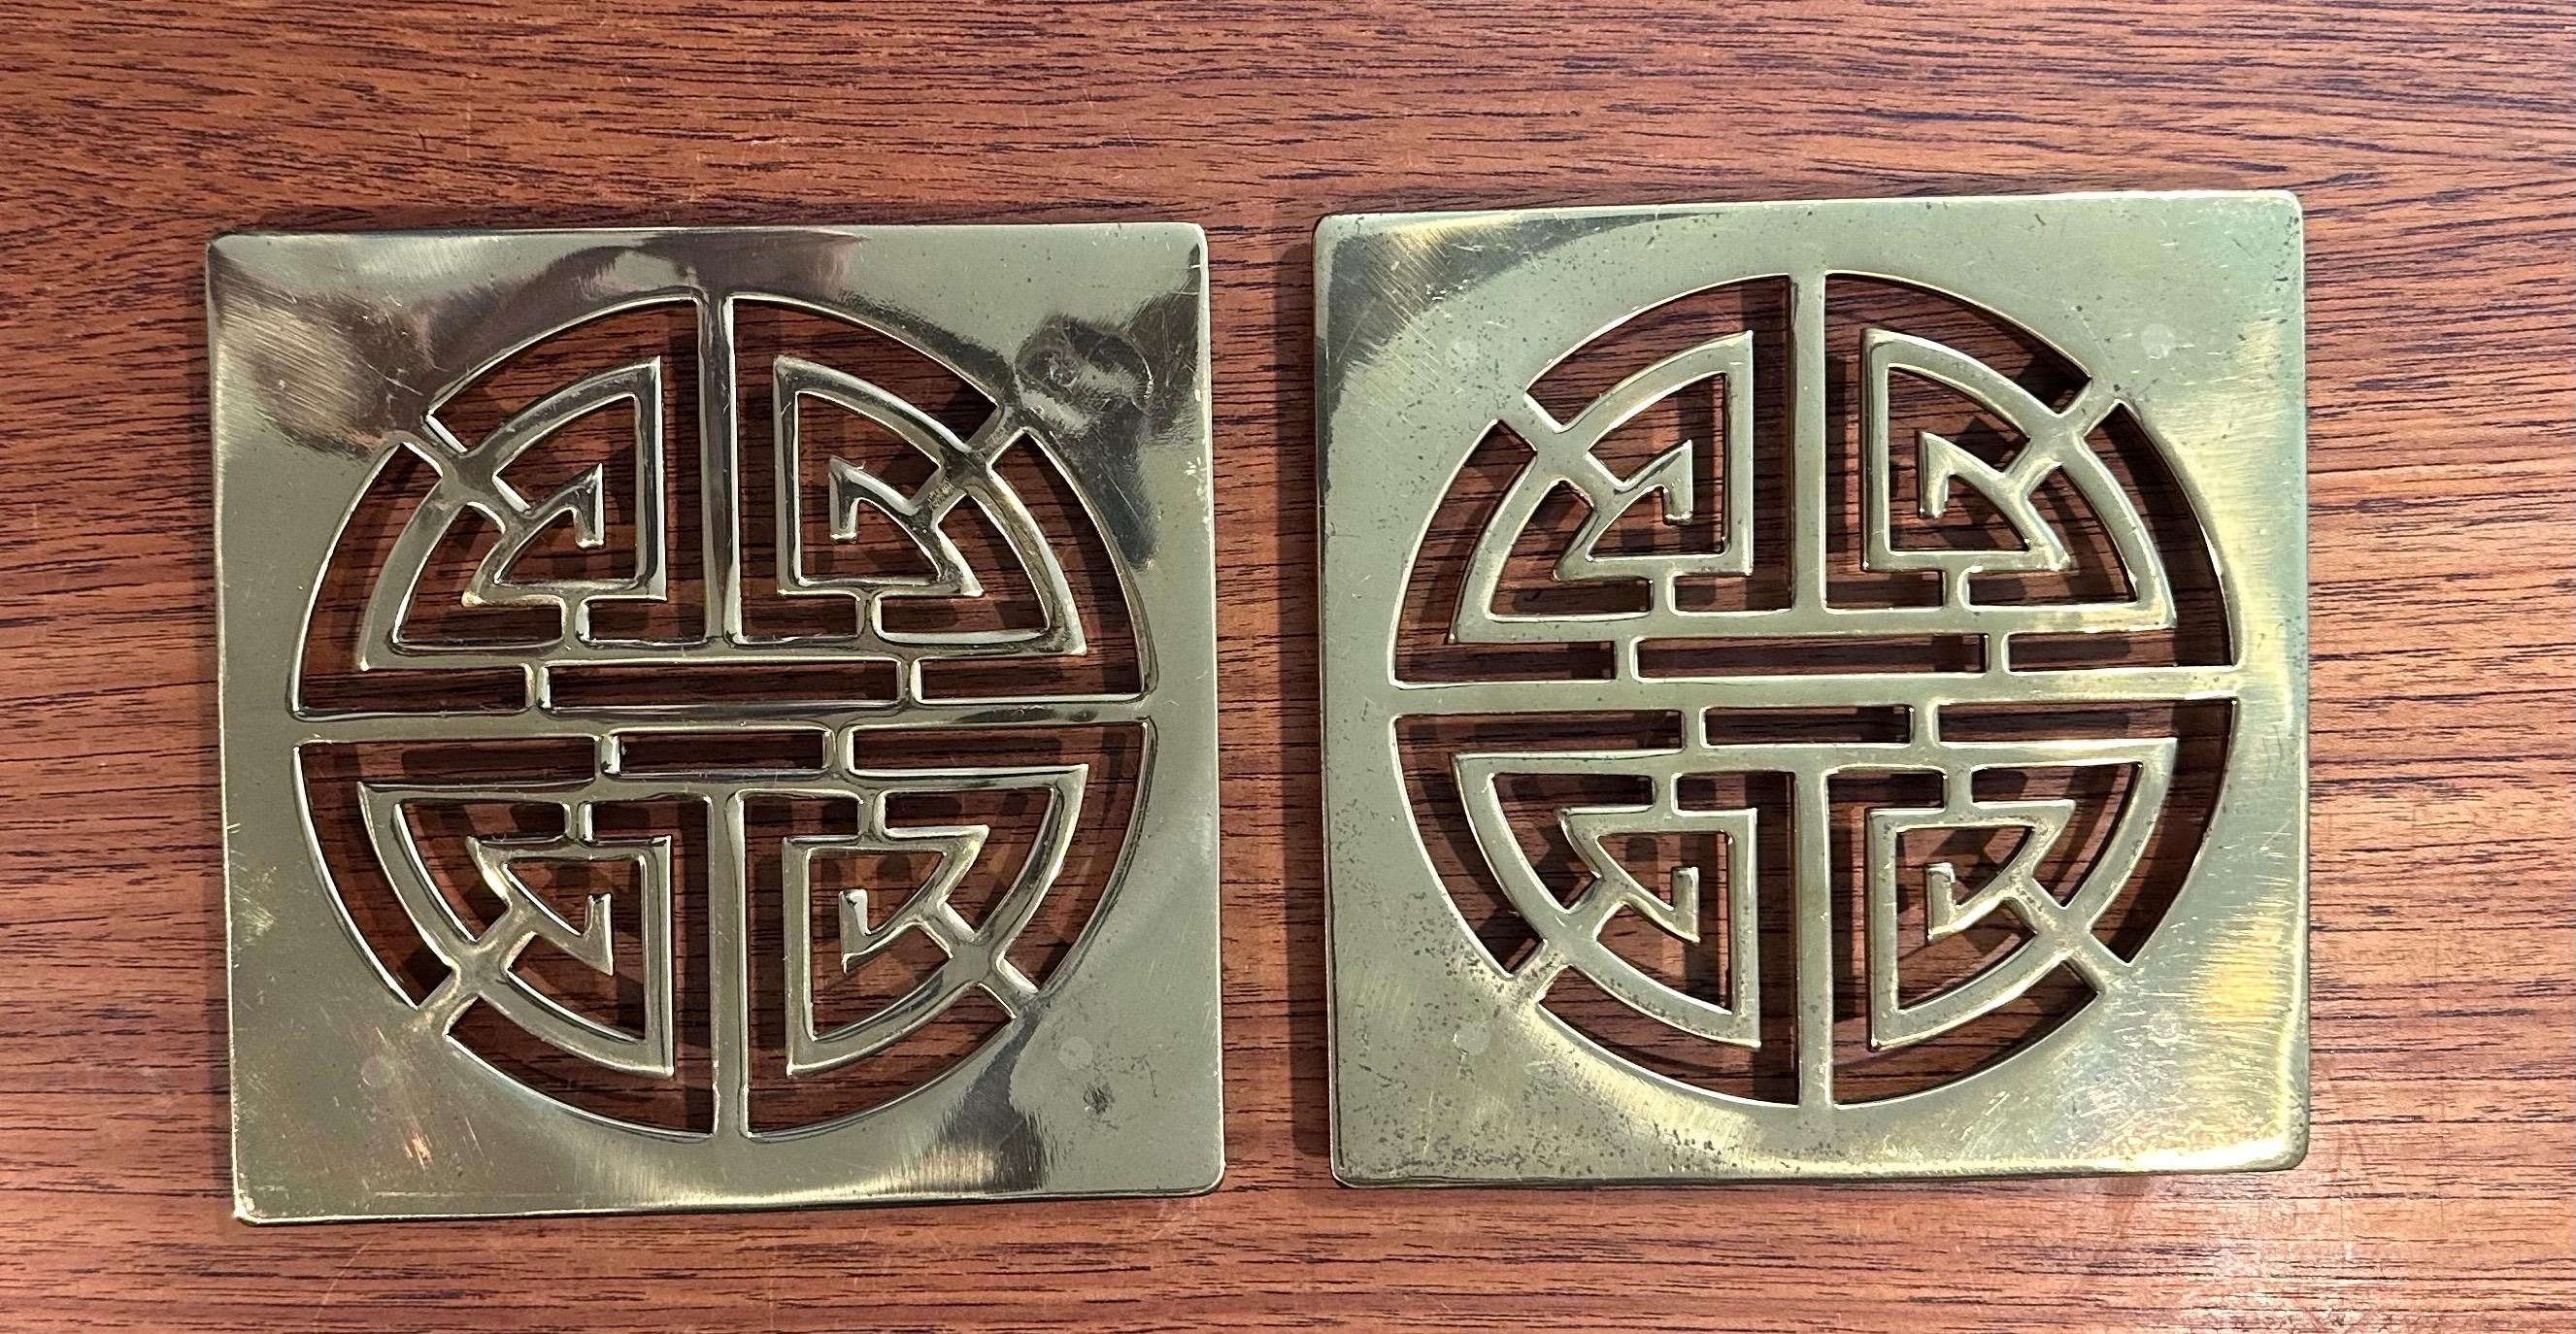 Pair of Asian Style Brass Trivets by Gumps For Sale 5